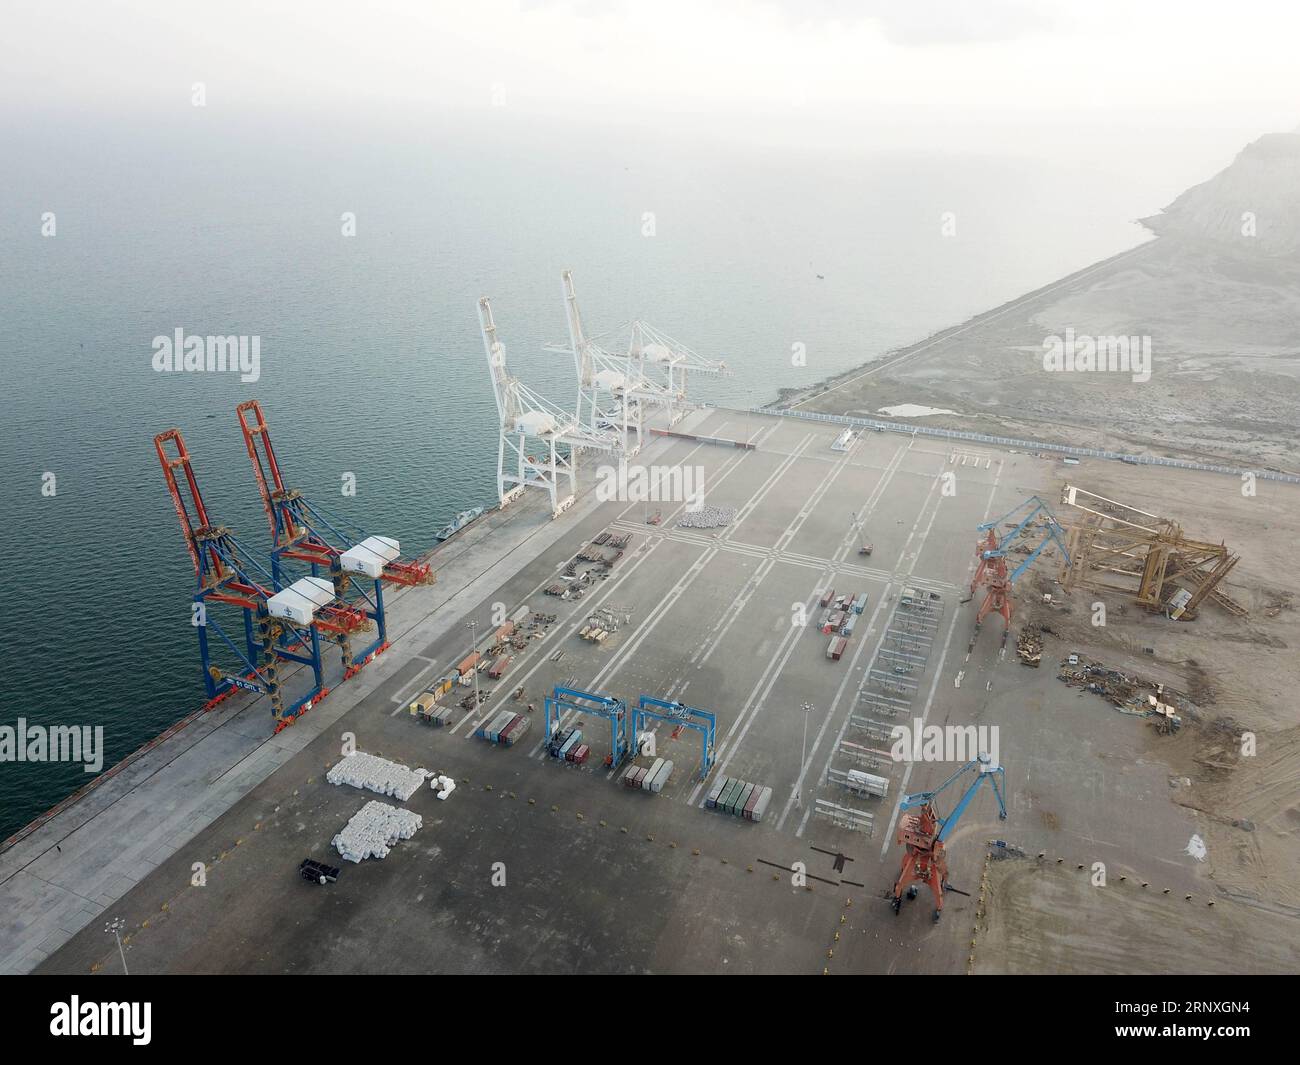 (180129) -- GWADAR, Jan. 29, 2018 -- Photo taken on Jan. 29, 2018 shows a view of Gwadar port in southwest Pakistan s Gwadar. The first phase of Gwadar Port s Free Zone in southwestern Pakistan was inaugurated on Monday by Prime Minister Shahid Khaqan Abbasi, who commented that the free zone would help facilitate regional and global trade under the China-Pakistan Economic Corridor (CPEC). ) (psw) PAKISTAN-GWADAR-FREE ZONE AhmadxKamal PUBLICATIONxNOTxINxCHN Stock Photo